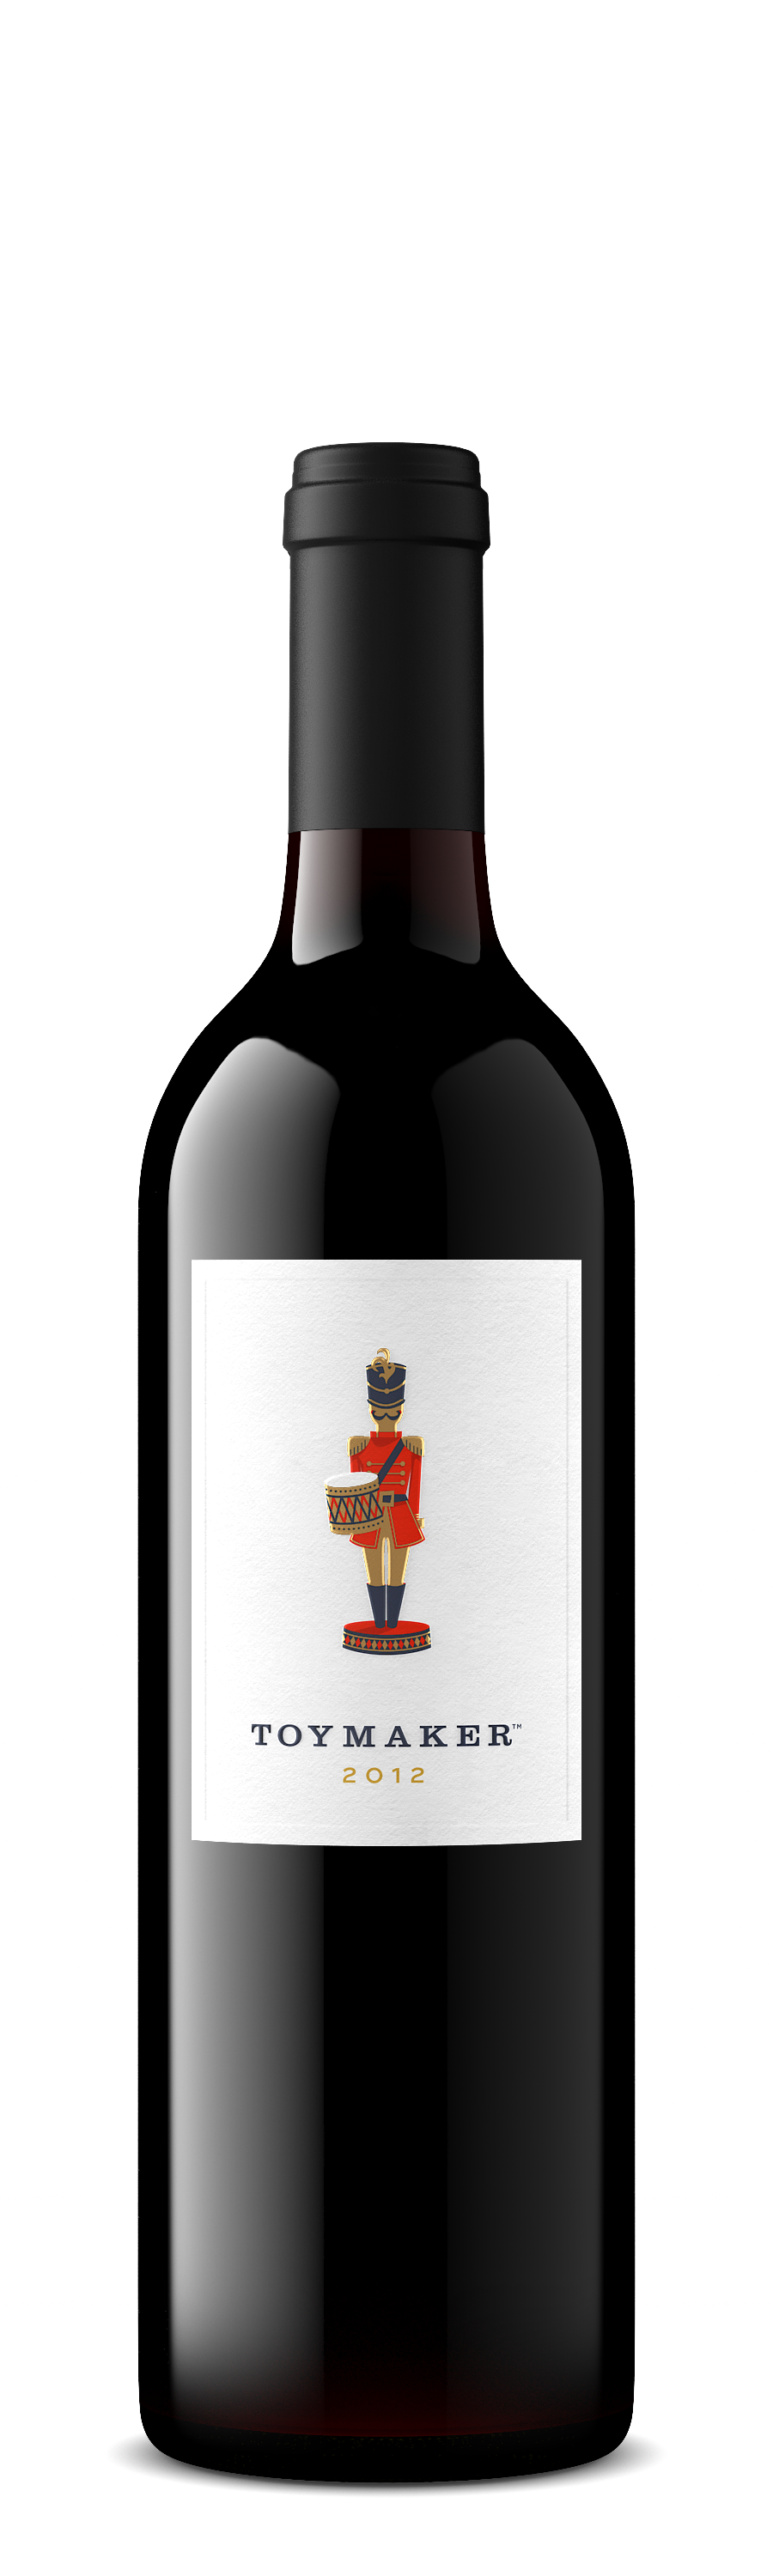 2012 ToyMaker Cellars Cabernet Sauvignon, Red Wine, Napa Valley, California, made by winemaker Martha McClellan of Sloan Estate, Checkerboard Vineyards, Levy & McClellan, and formerly of Harlan Estate. Best Napa Valley Grand Cru red wines.